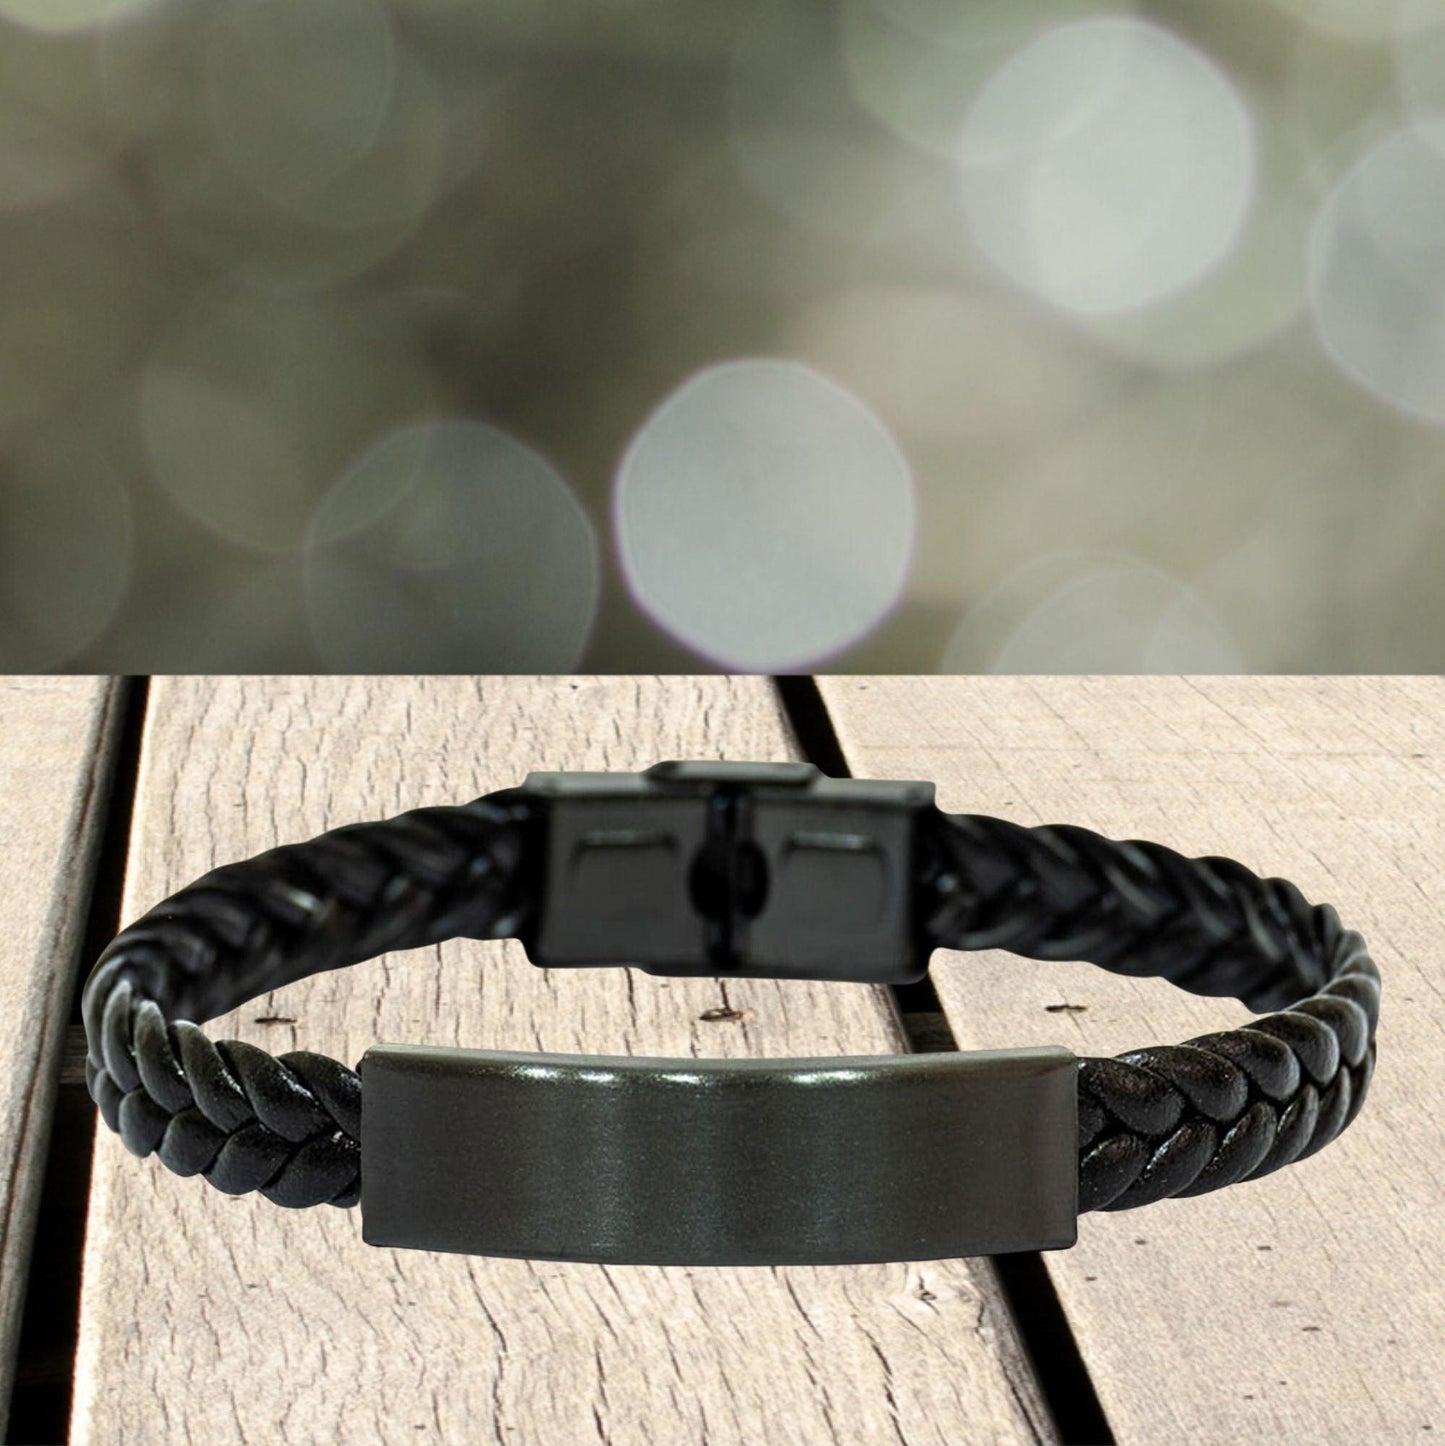 Remarkable Network Administrator Gifts, Your dedication and hard work, Inspirational Birthday Christmas Unique Braided Leather Bracelet For Network Administrator, Coworkers, Men, Women, Friends - Mallard Moon Gift Shop